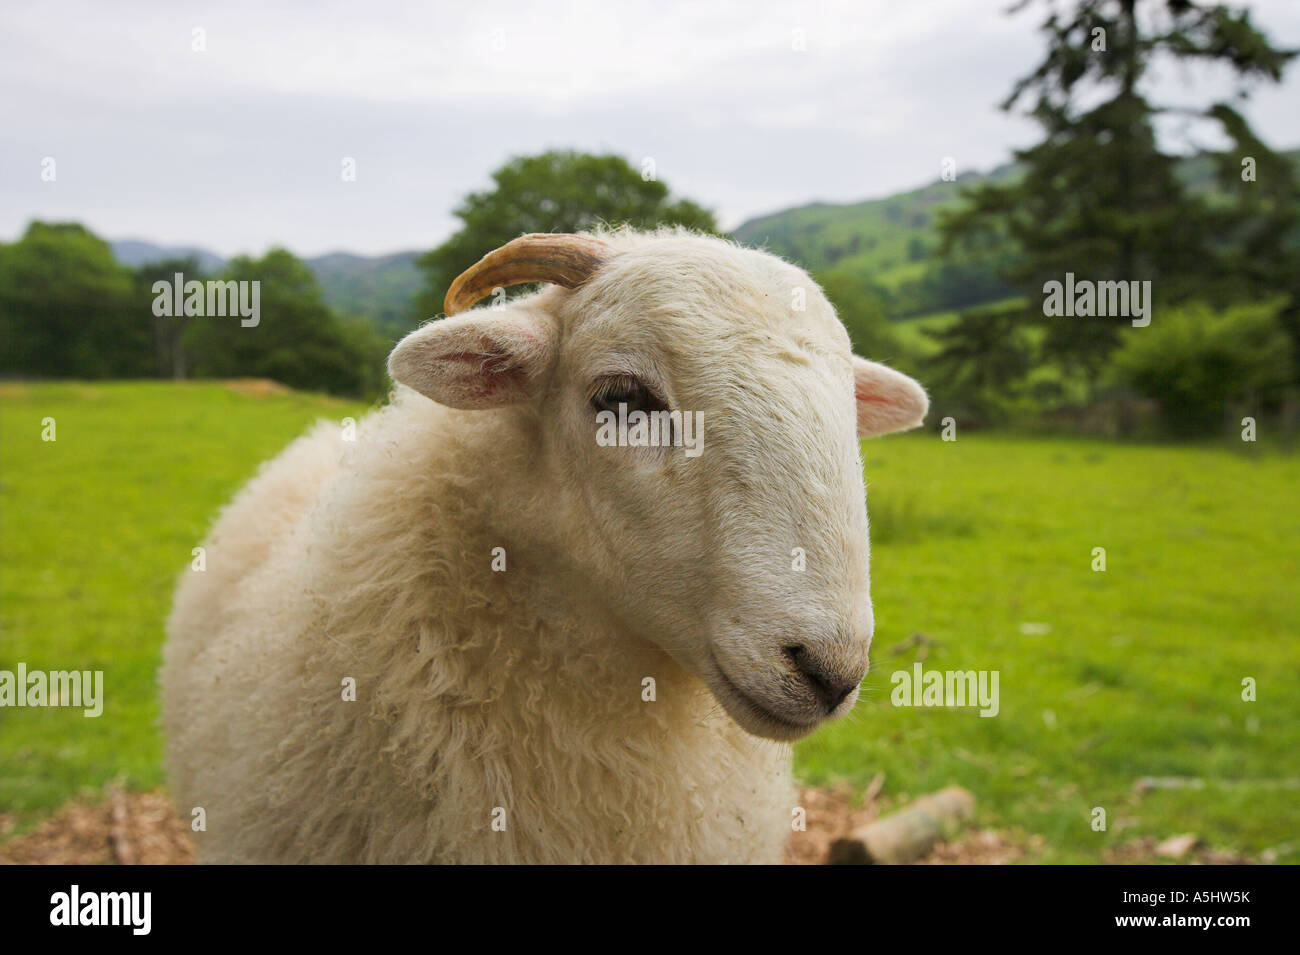 tame young sheep with short horns Stock Photo